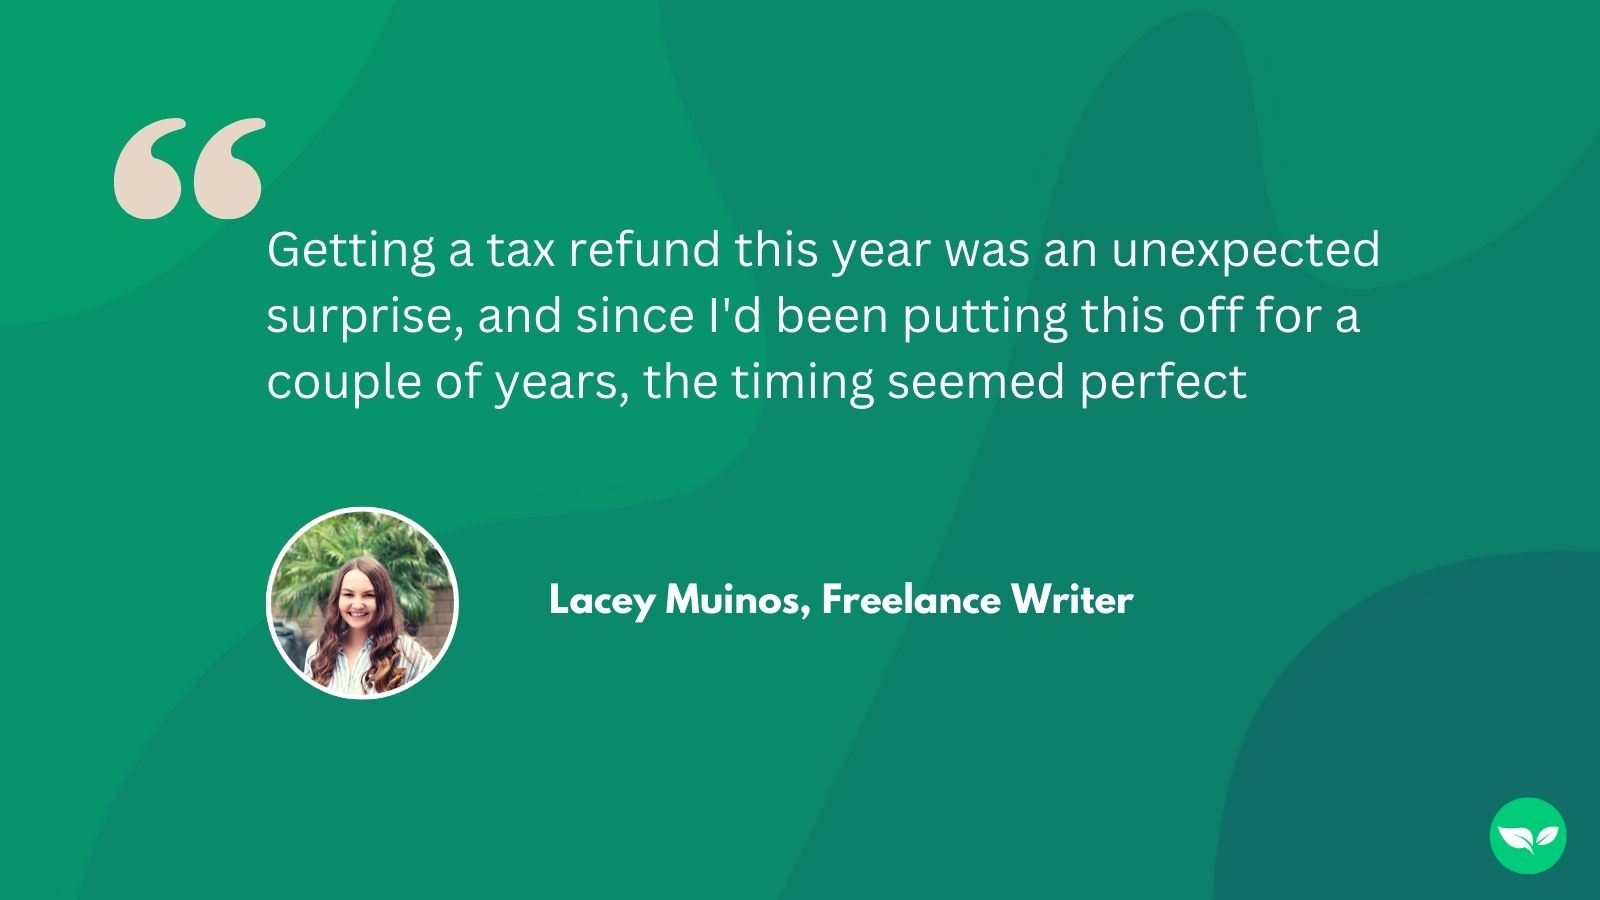 A quote from Lacey Muinos, a freelance writer.